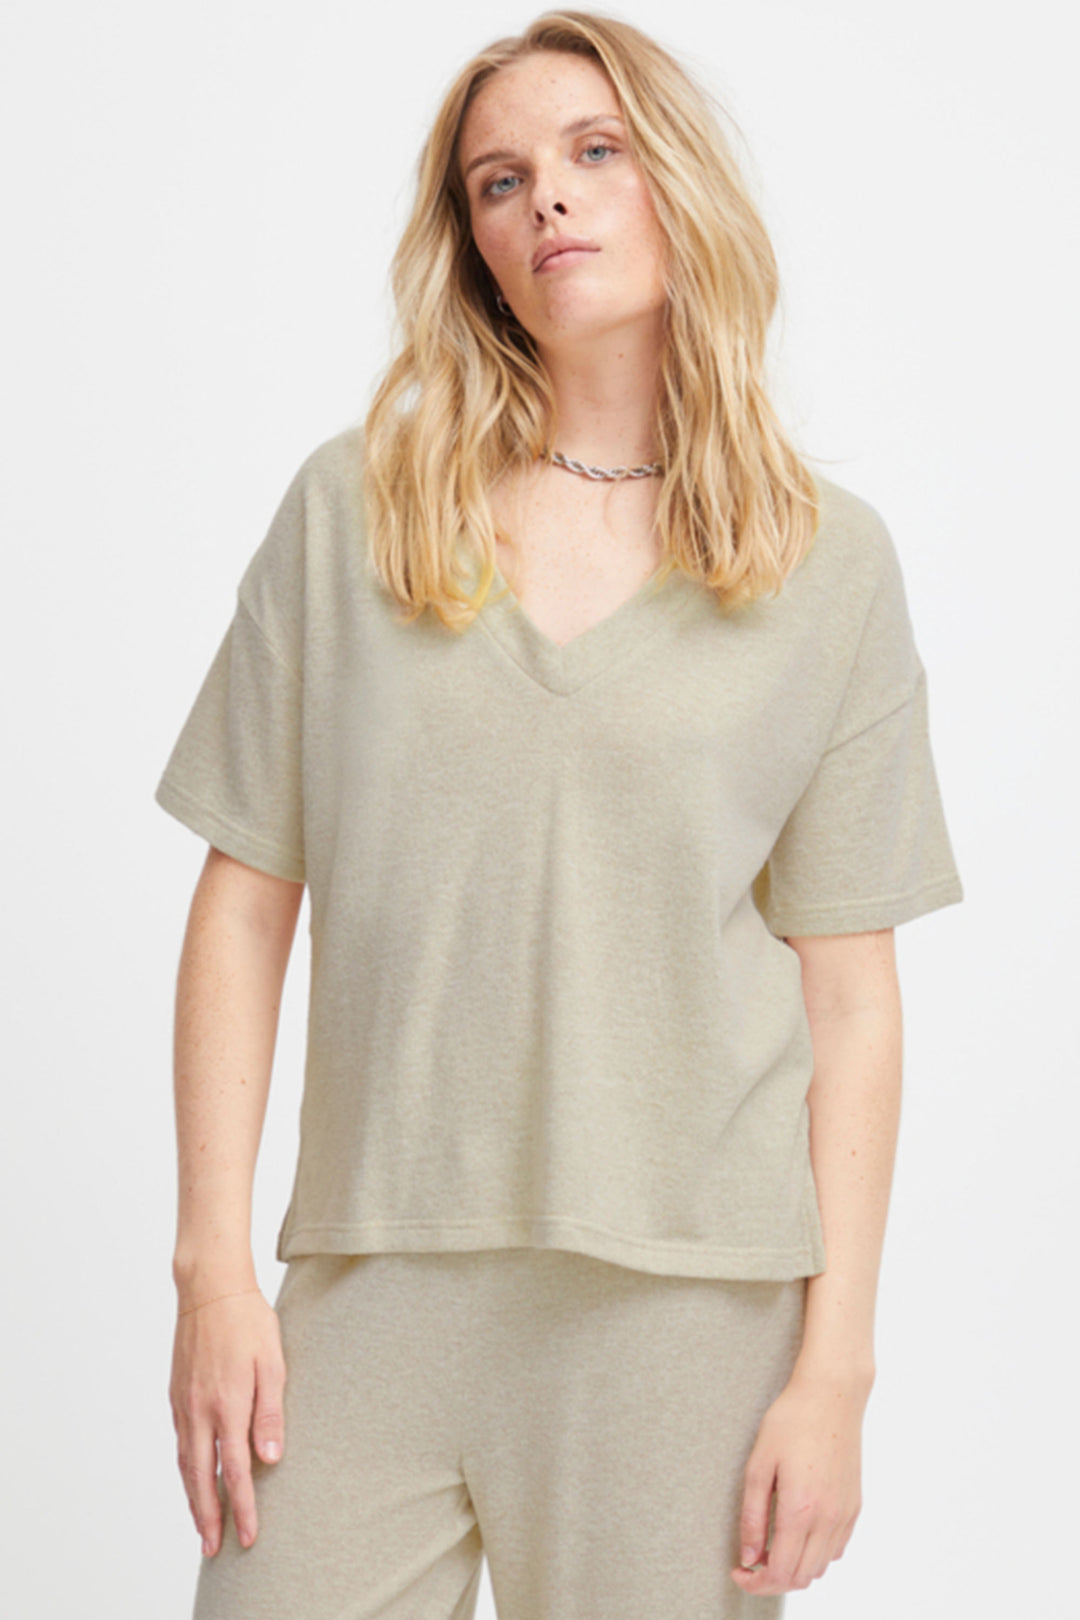 The relaxed fit and V-neck style make it perfect for house wear and basic everyday attire. 